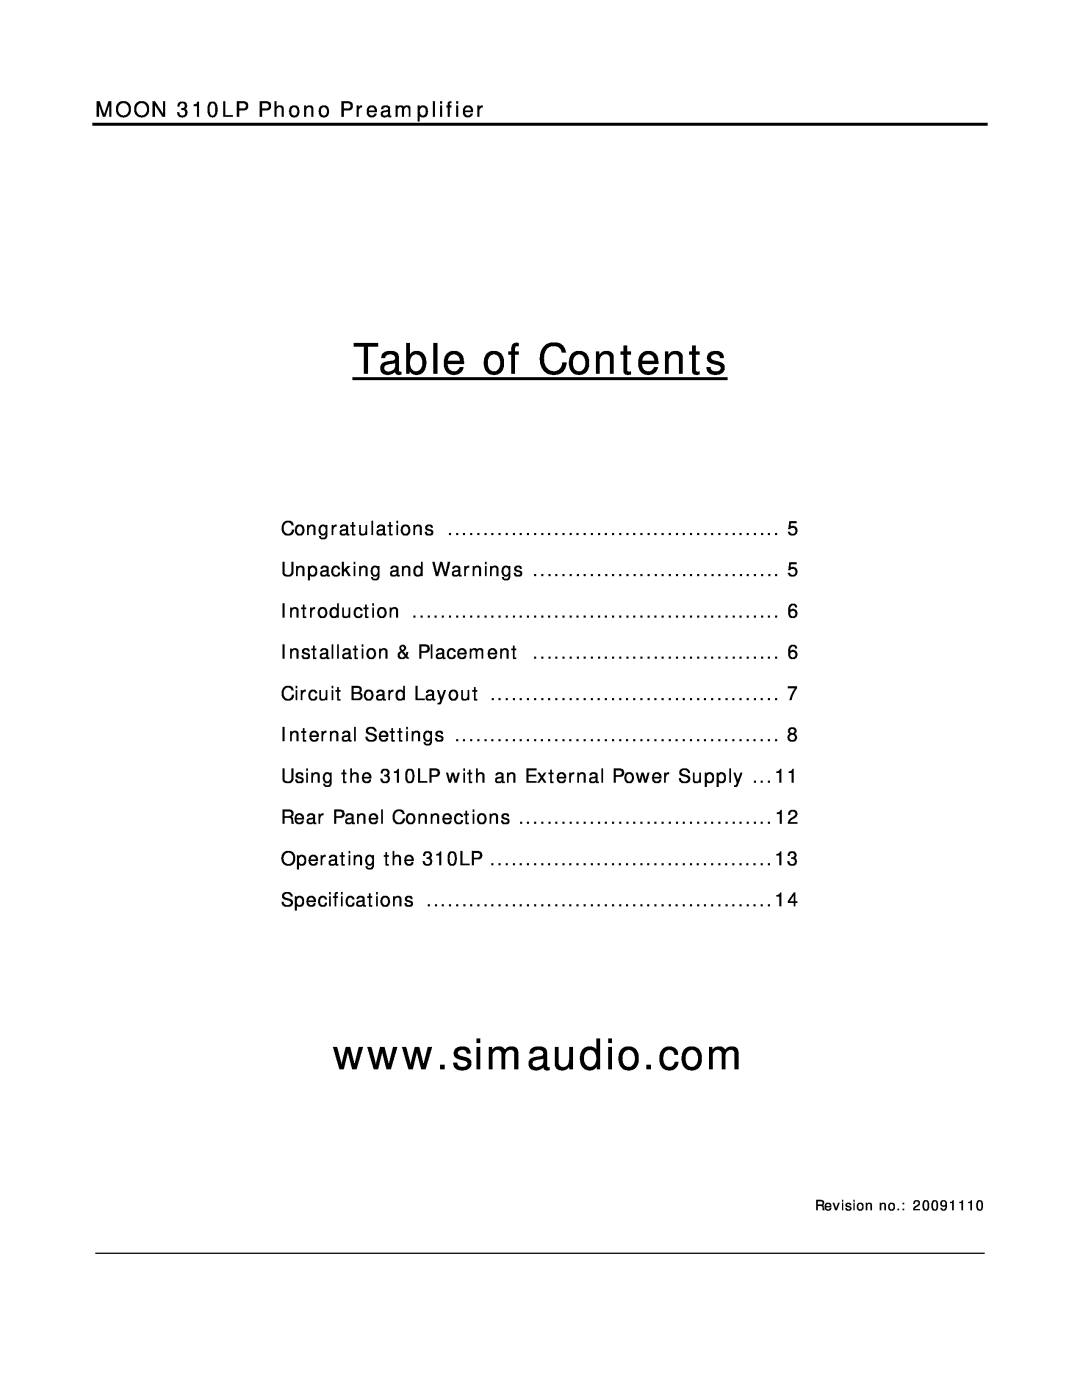 Simaudio 310 LP owner manual Table of Contents, MOON 310LP Phono Preamplifier 